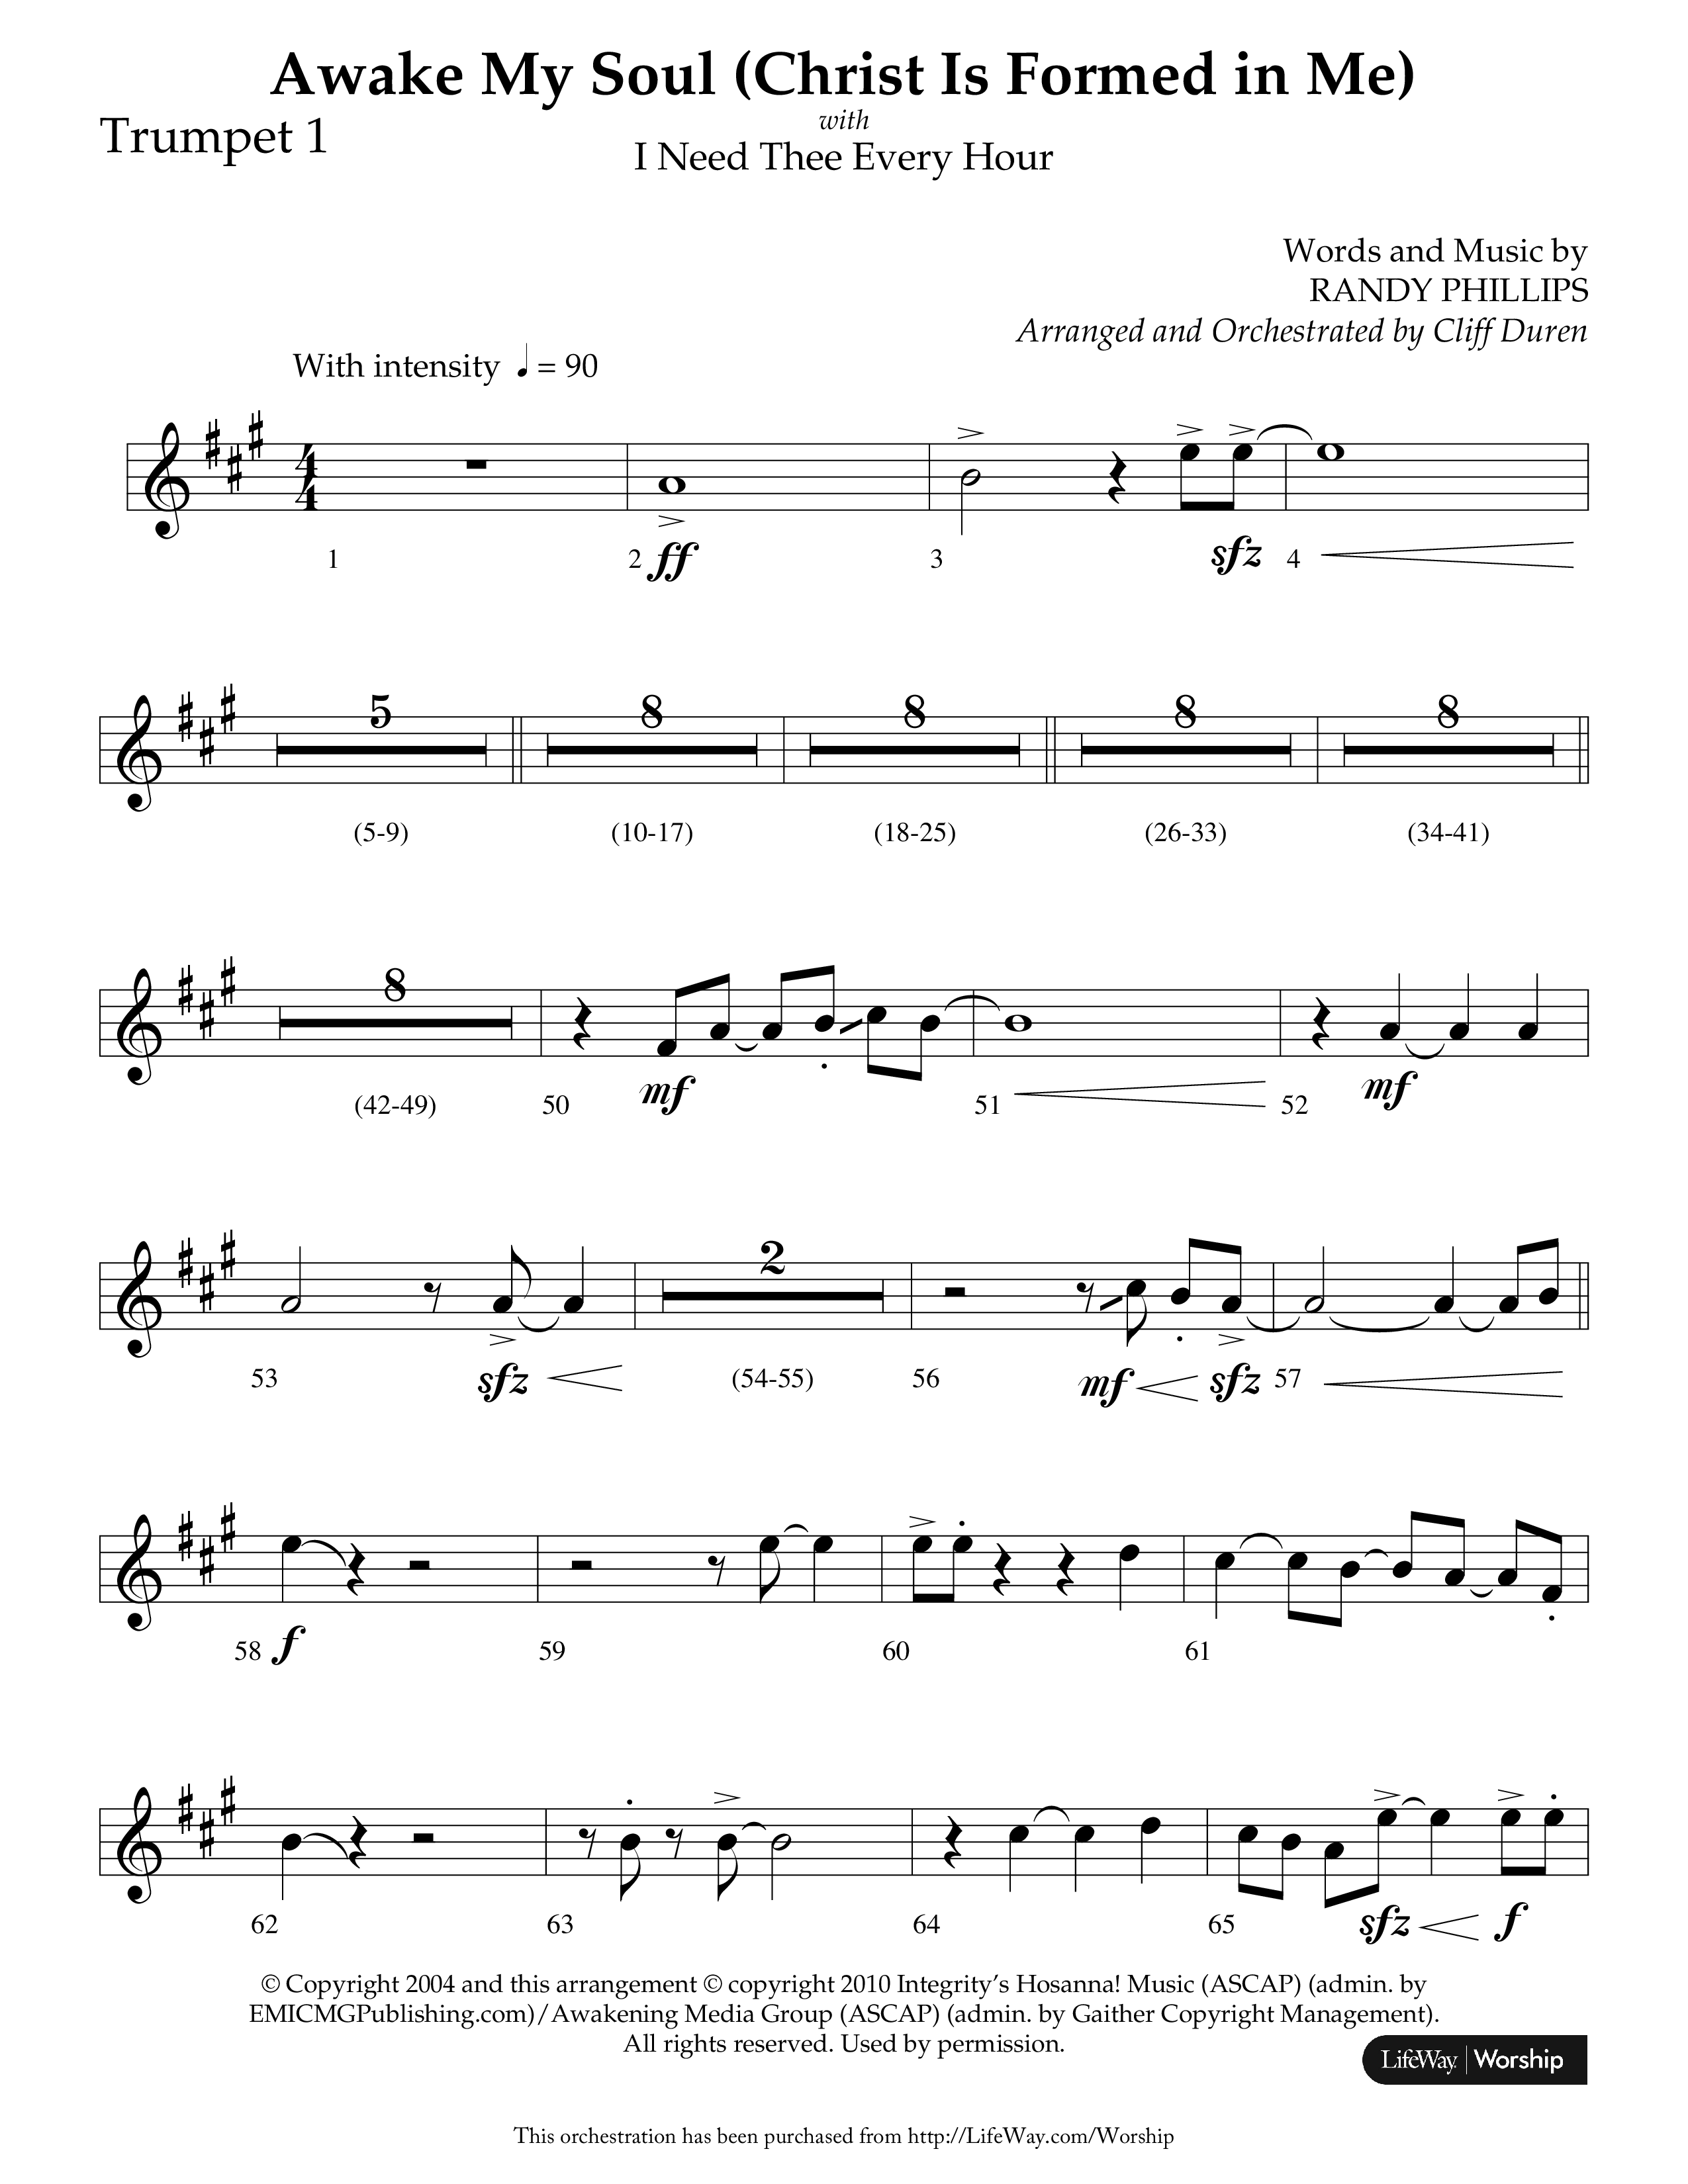 Awake My Soul (Christ Is Formed In Me) with I Need Thee Every Hour (Choral Anthem SATB) Trumpet 1 (Lifeway Choral / Arr. Cliff Duren)